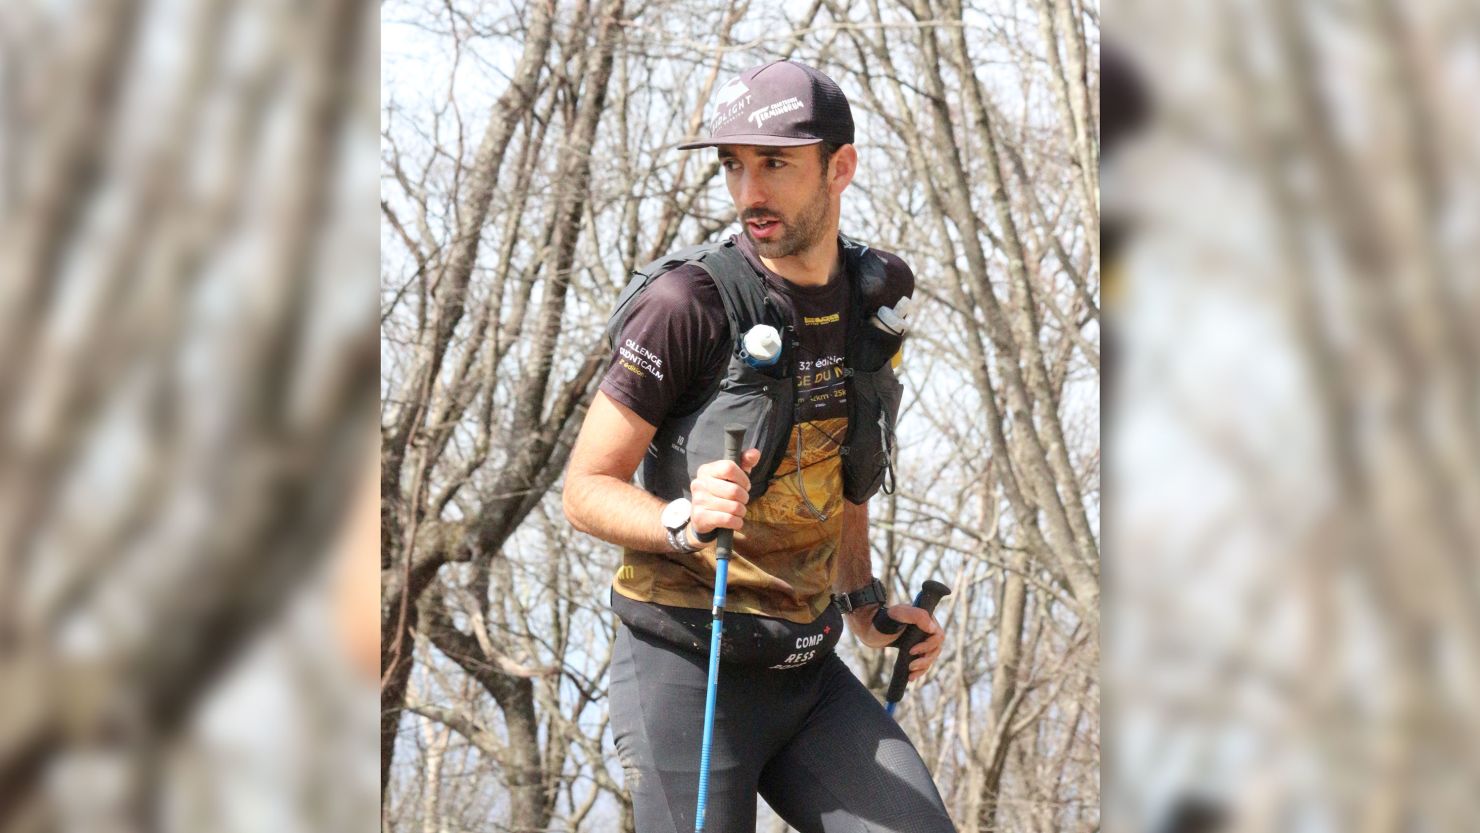 Few people have ever finished the Barkley Marathons. Thanks to